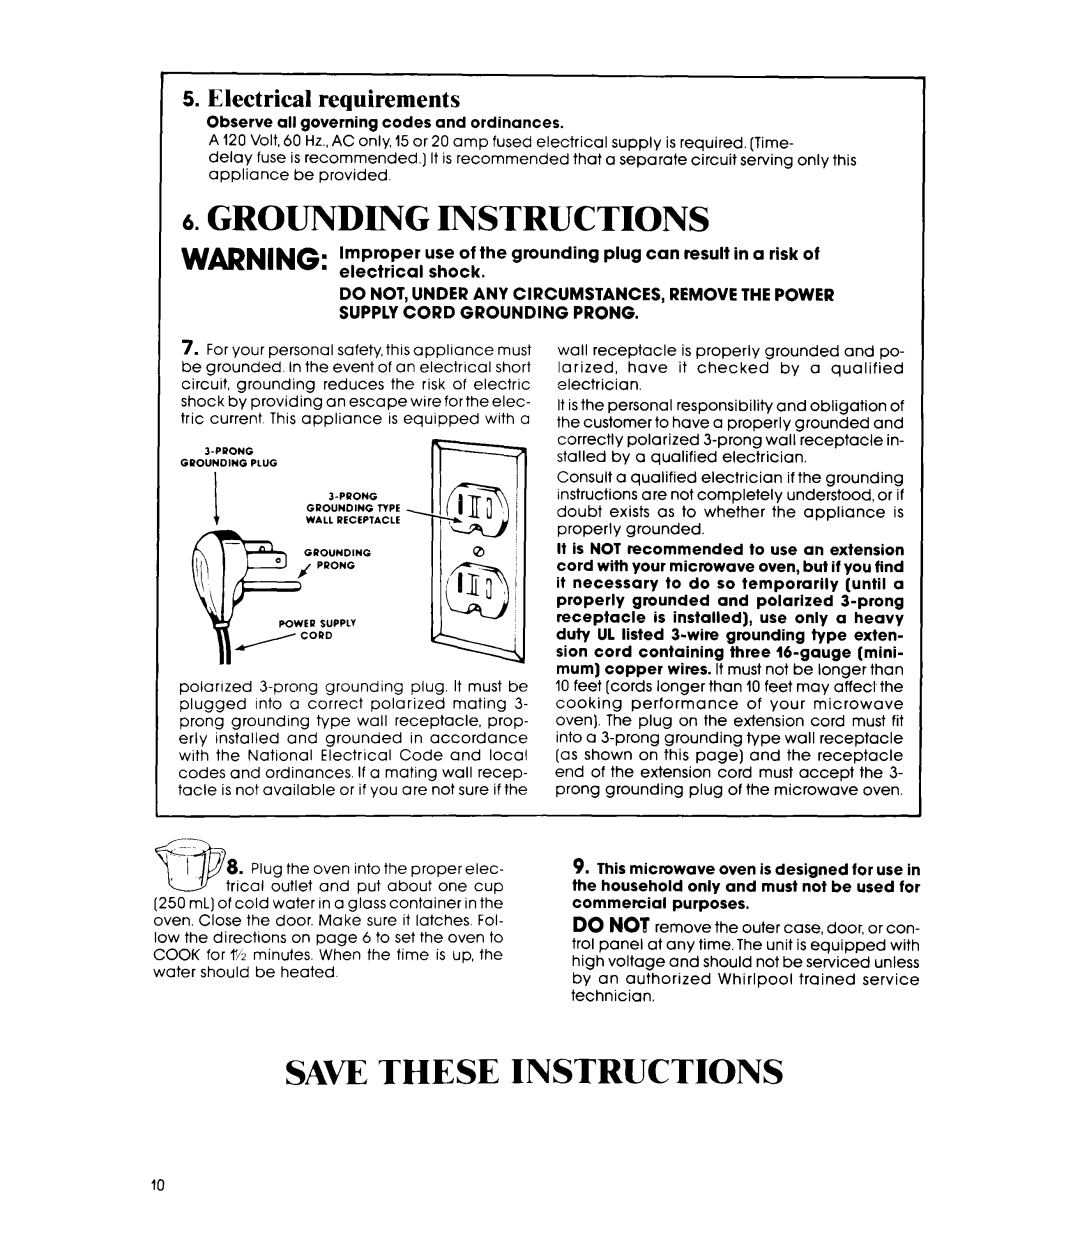 Whirlpool MW8100XR manual Grounding Instructions, Save These Instructions, Electrical requirements 